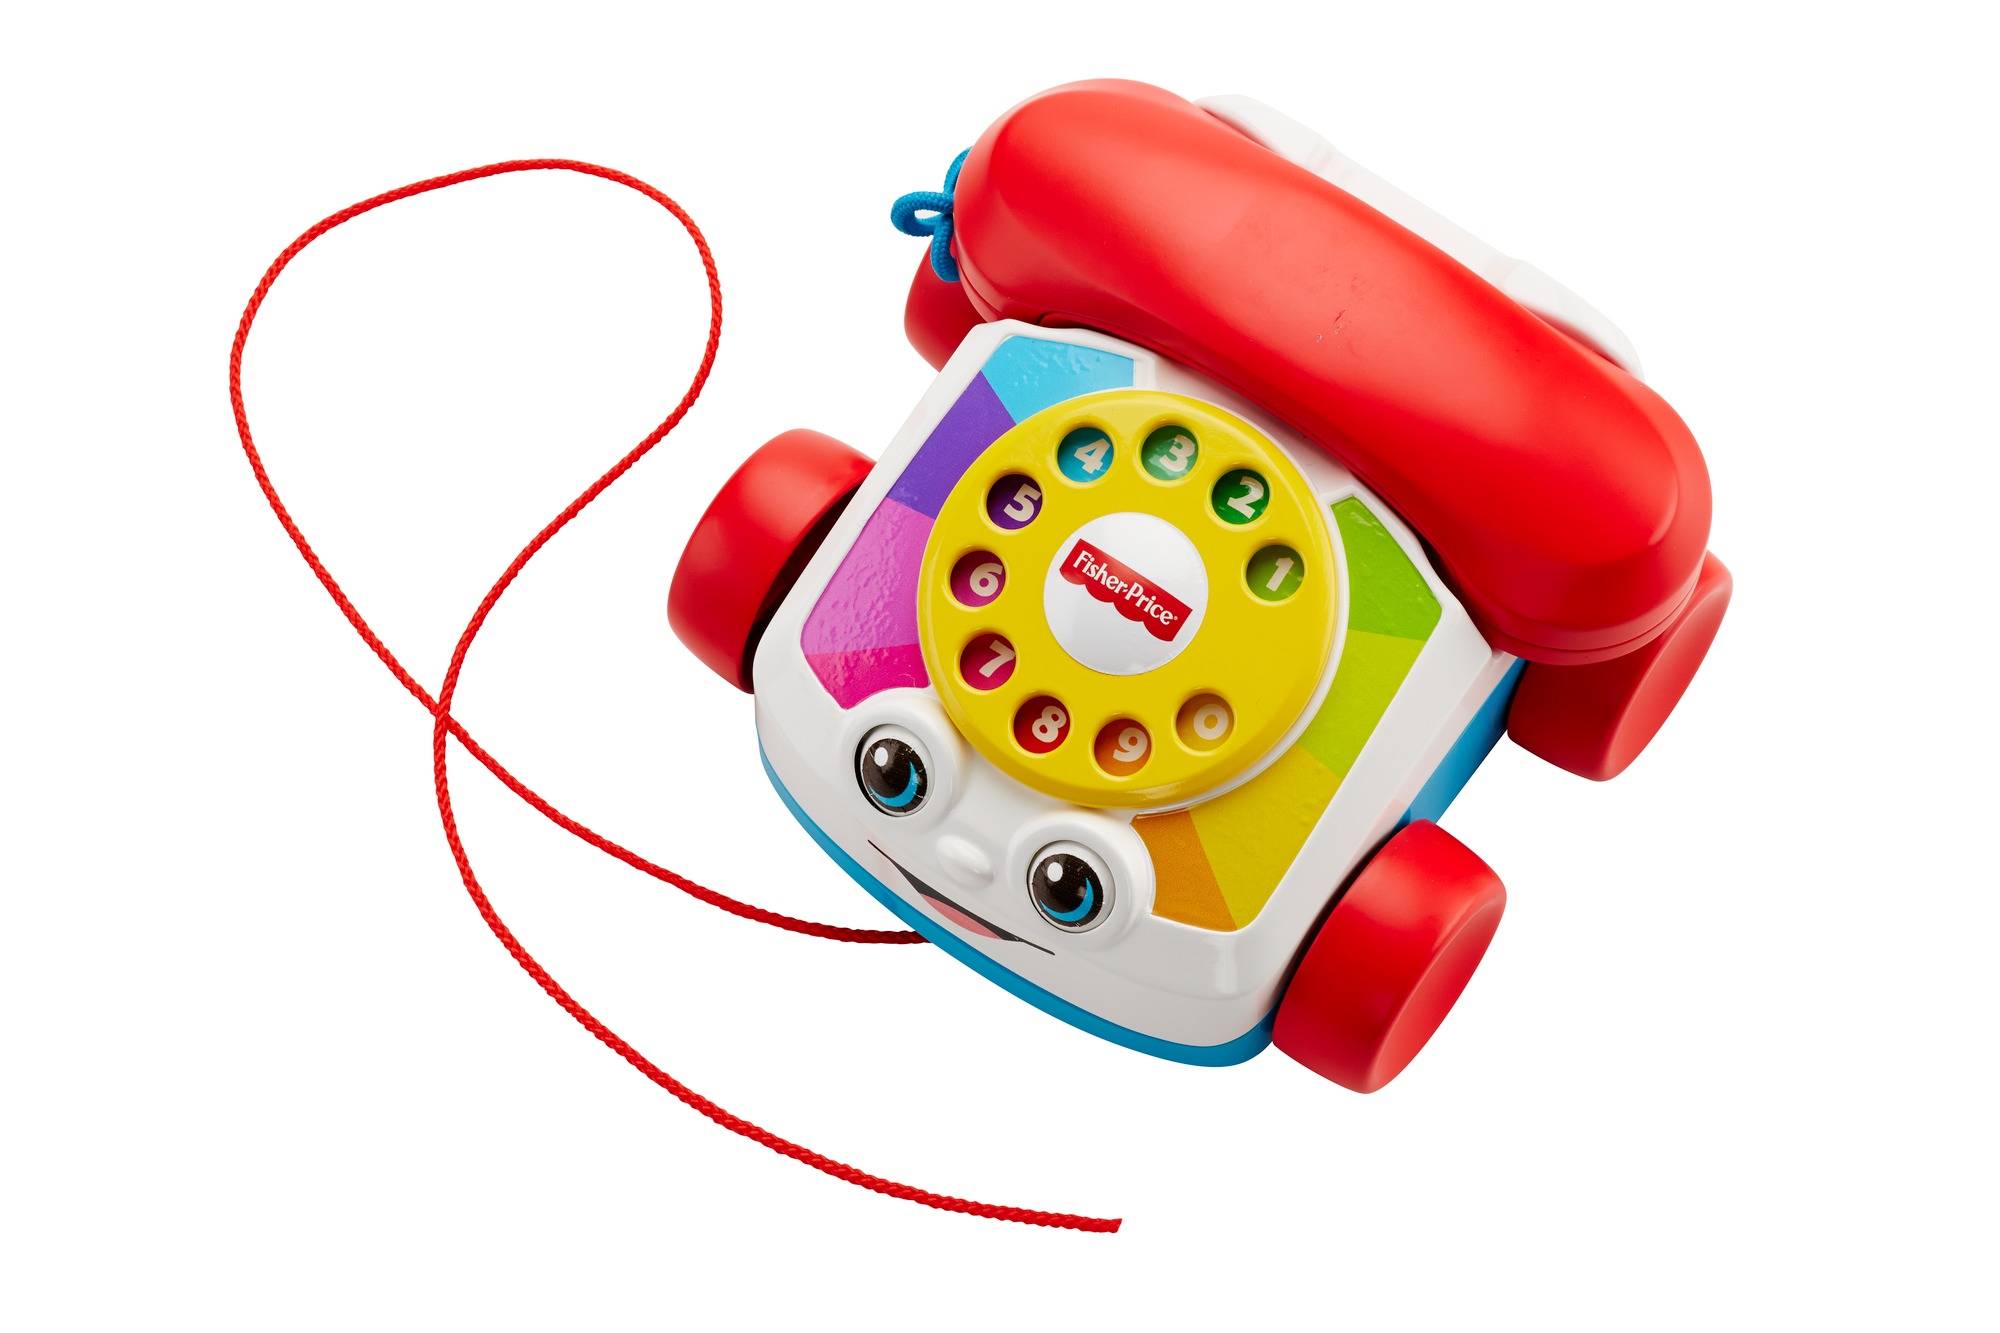 Fisher-Price Chatter Telephone Baby and Toddler Pull Toy Phone with Rotary Dial - image 5 of 6